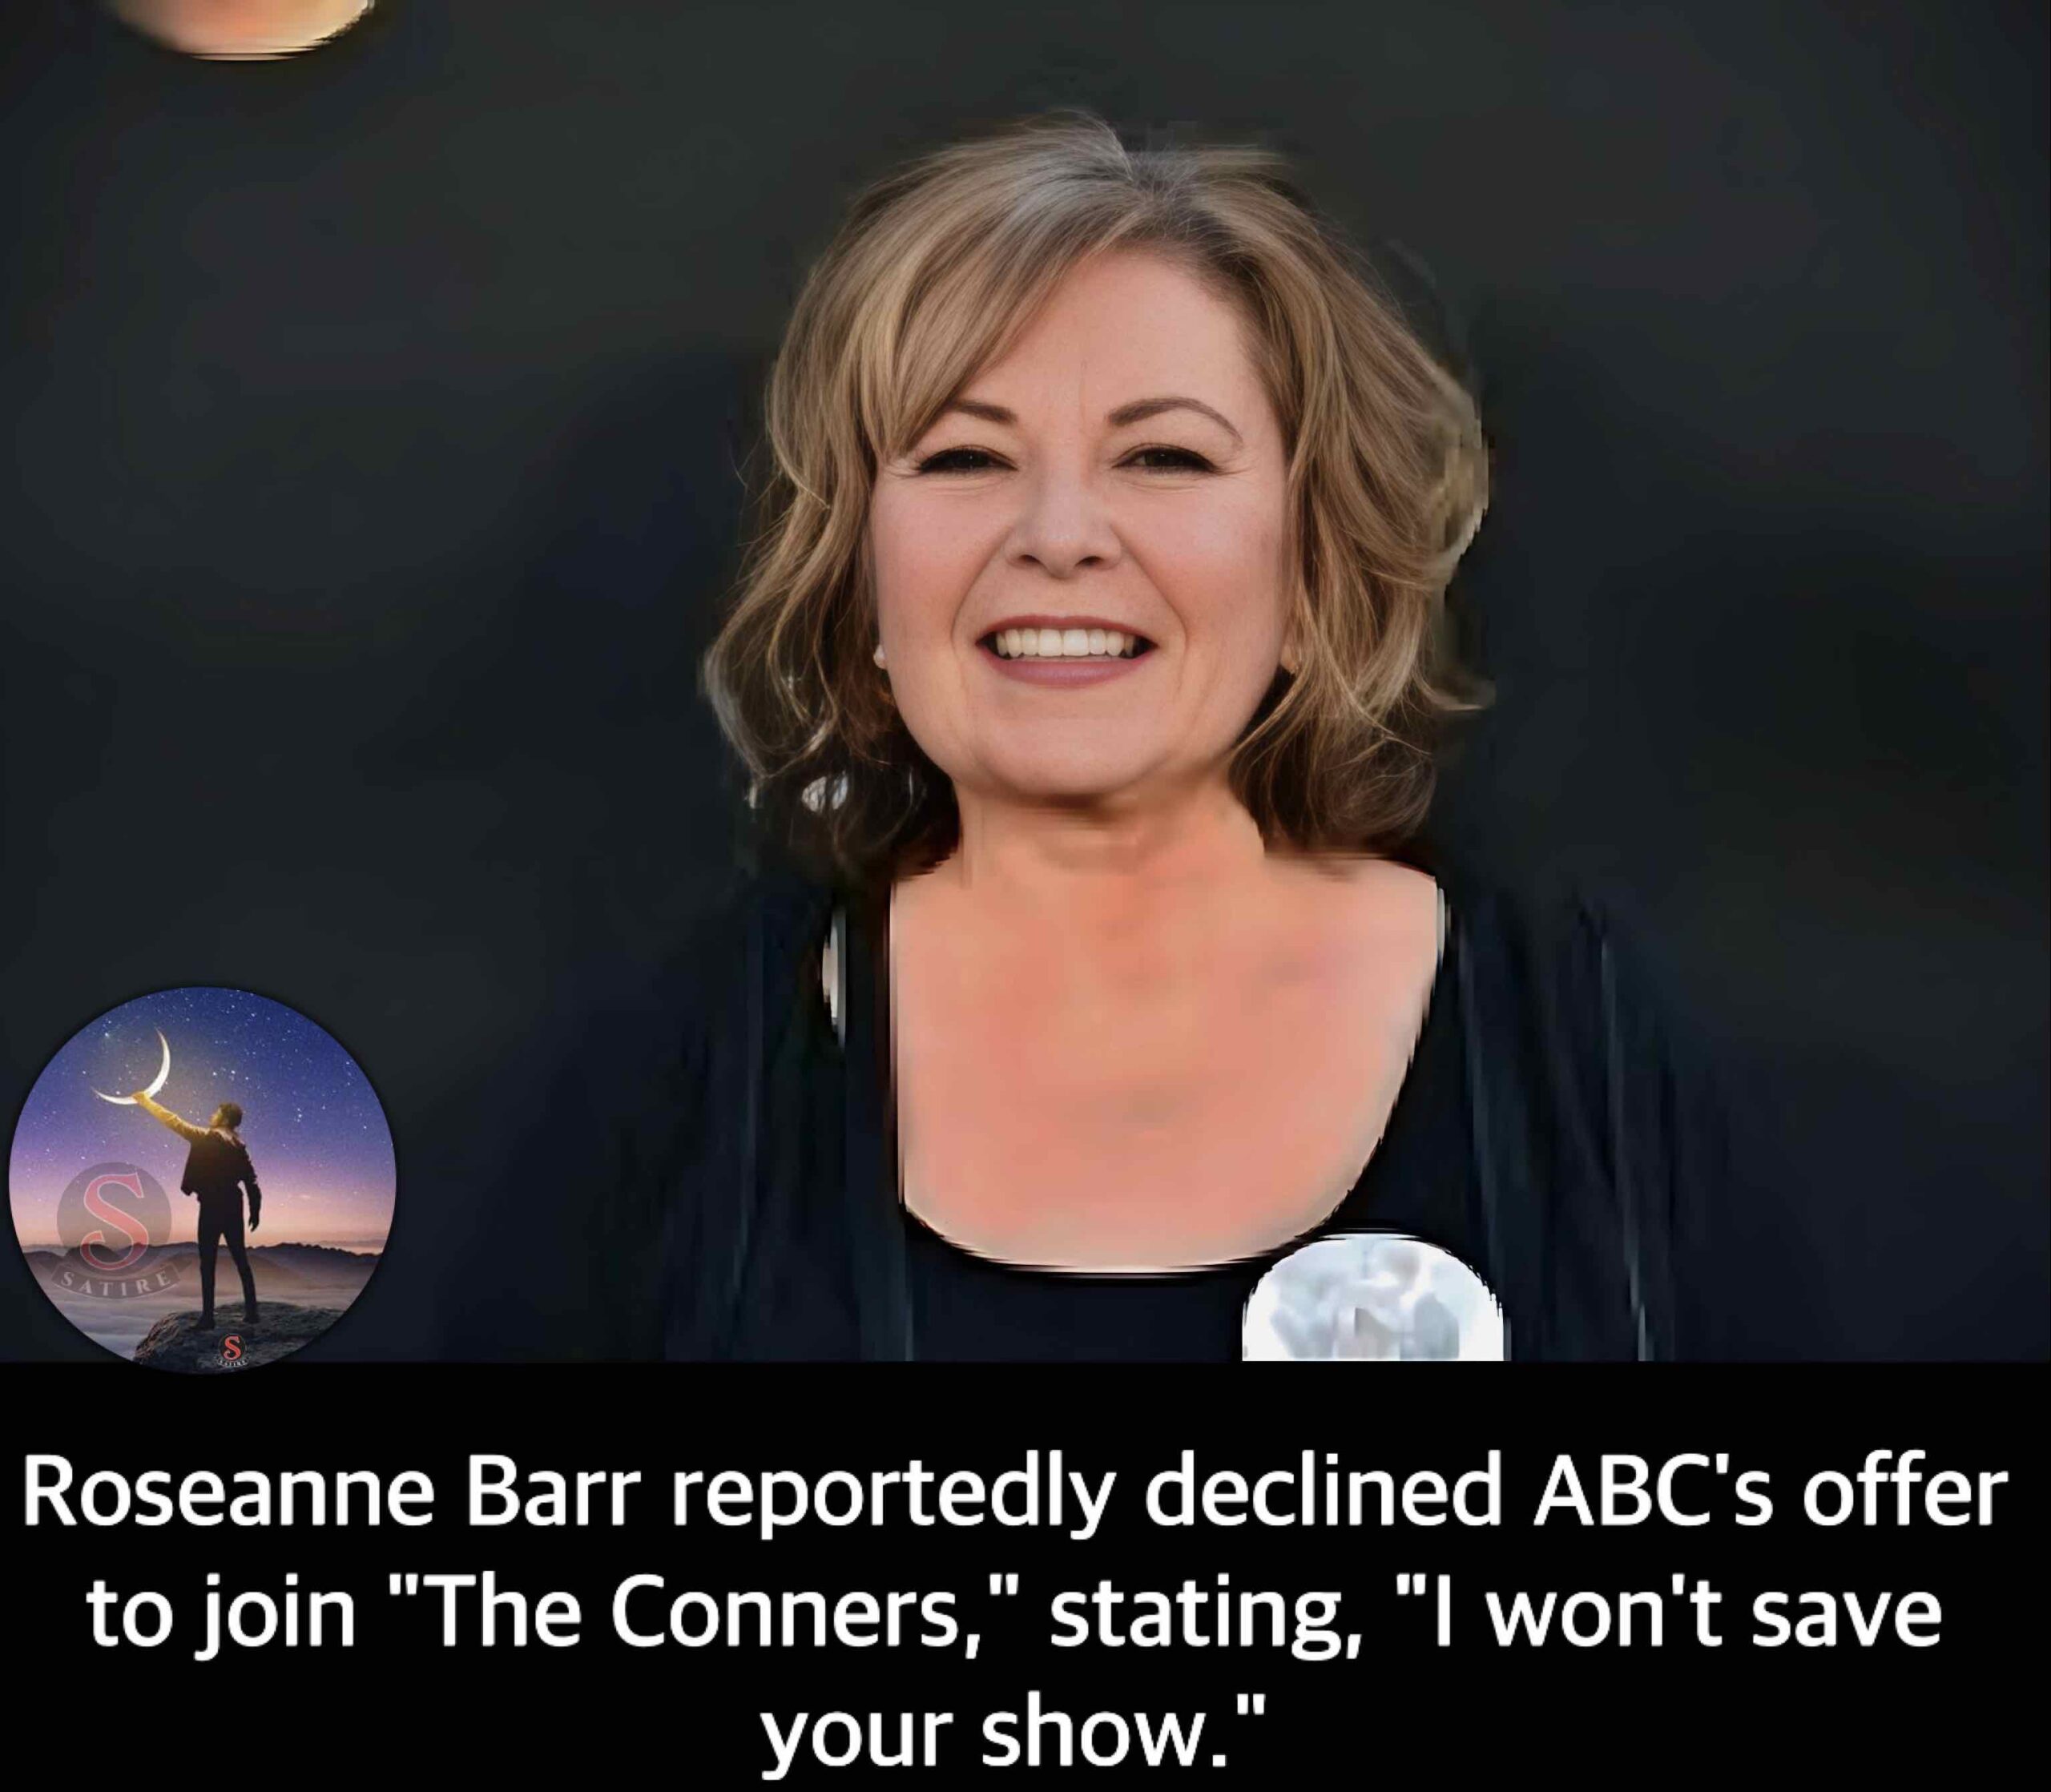 Roseanne Barr reportedly declined ABC’s offer to join “The Conners,” stating, “I won’t save your show.”